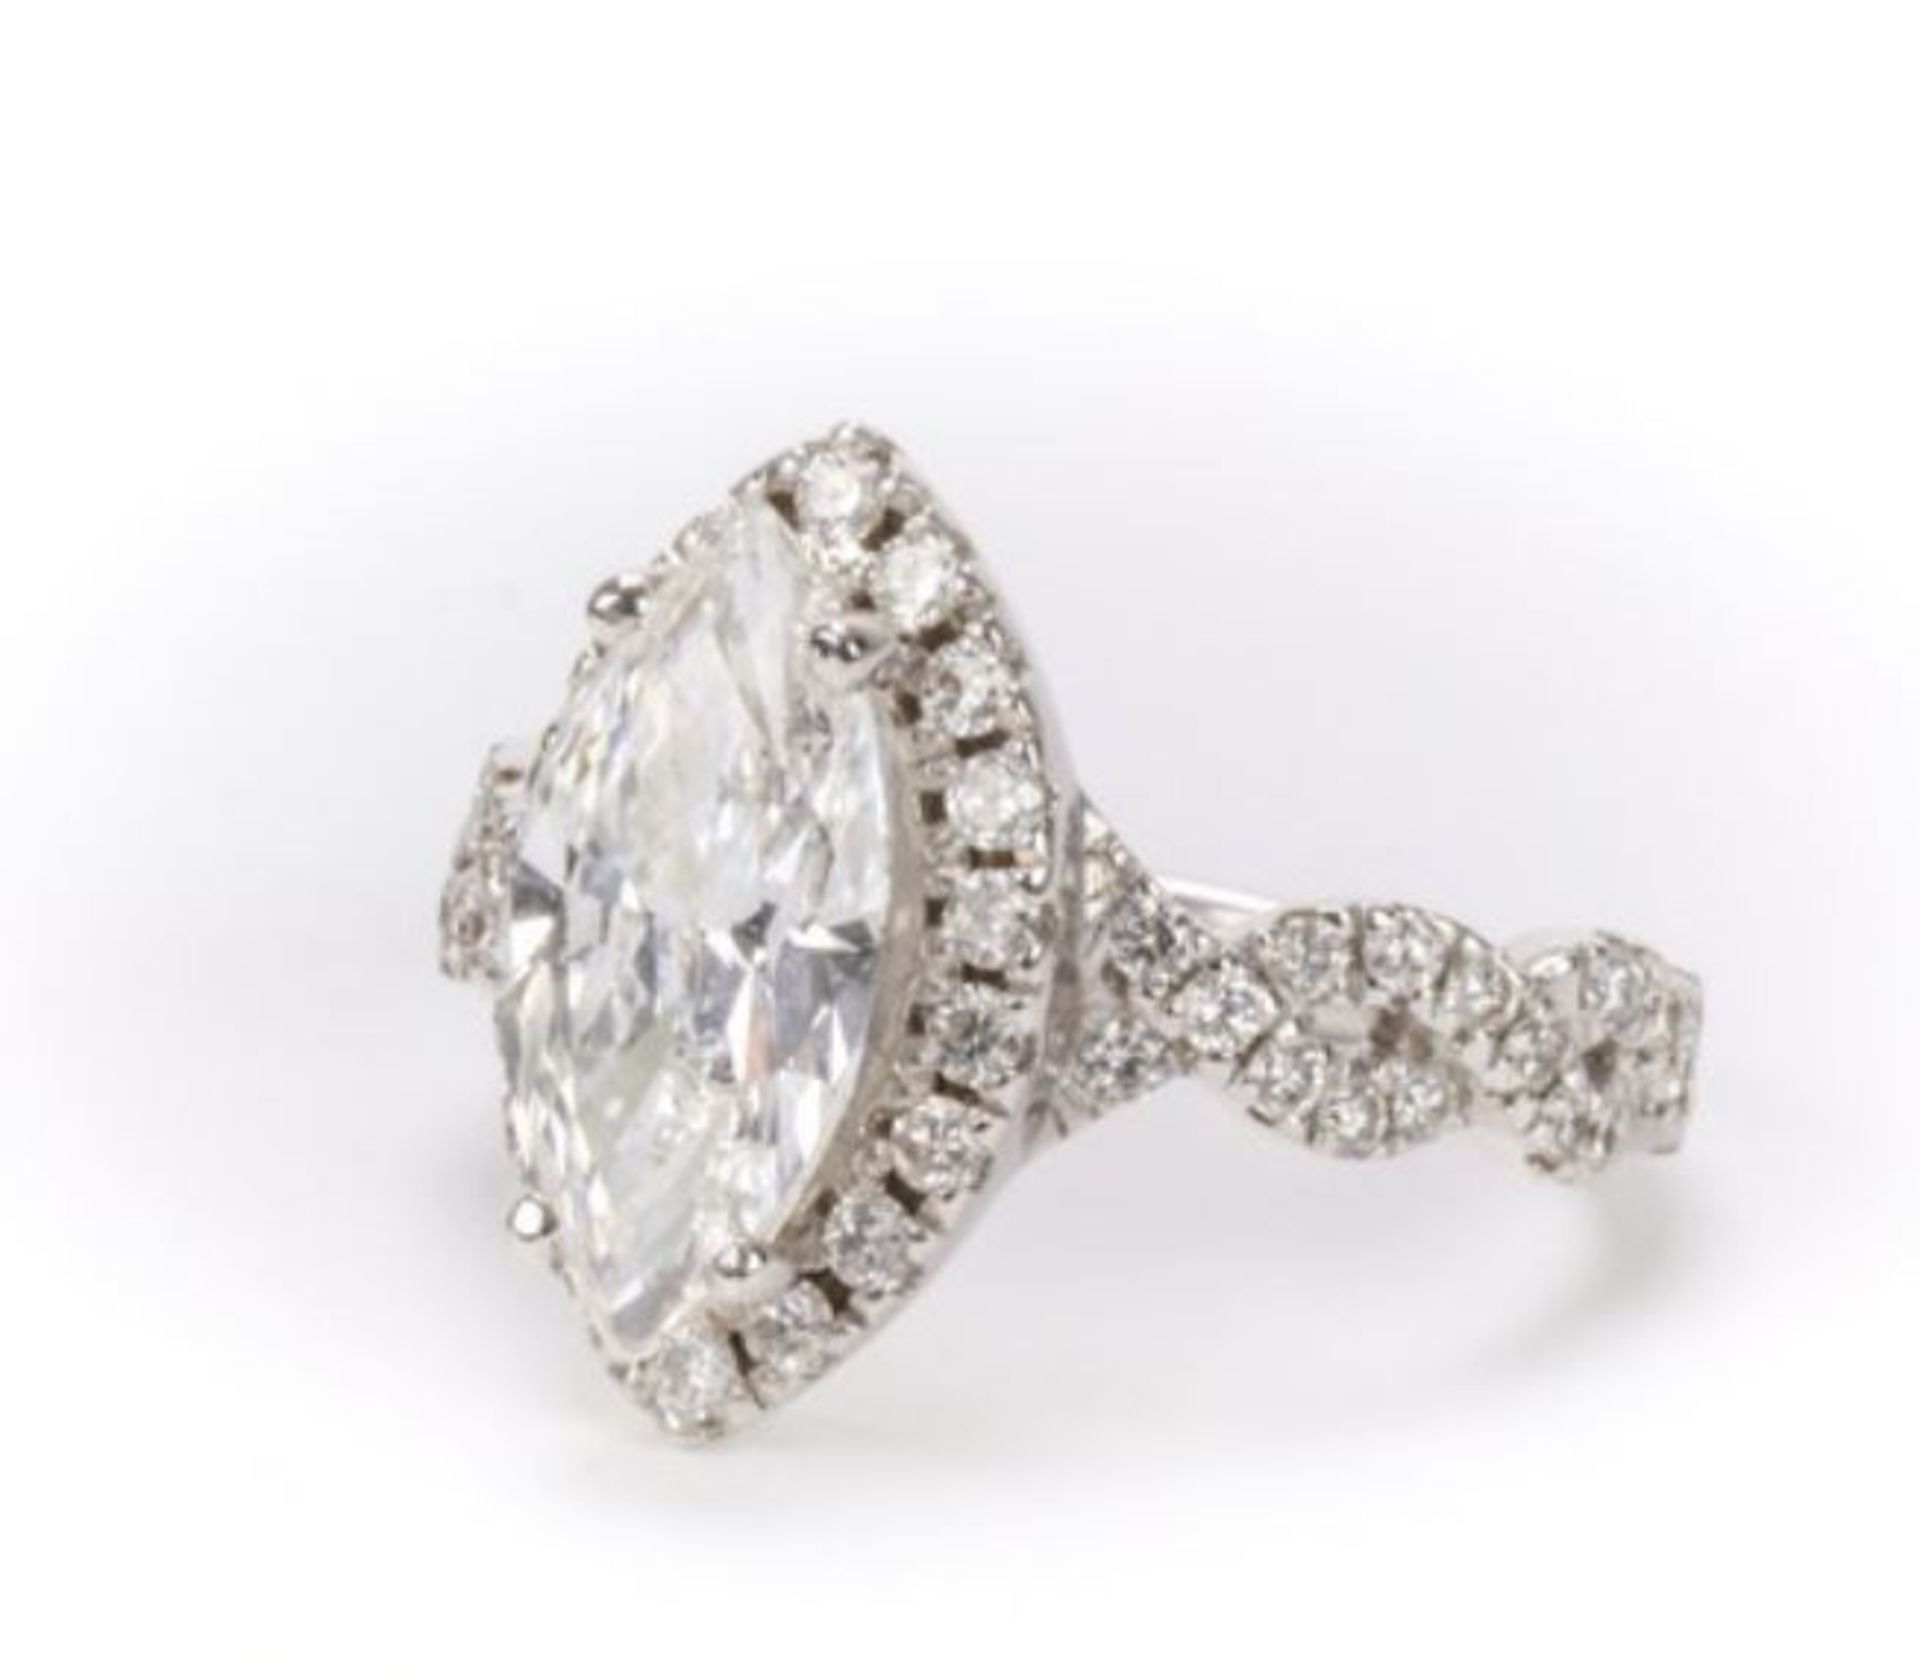 18ct White Gold Marquise Halo Diamond Ring 2.02 Carats - Image 2 of 5